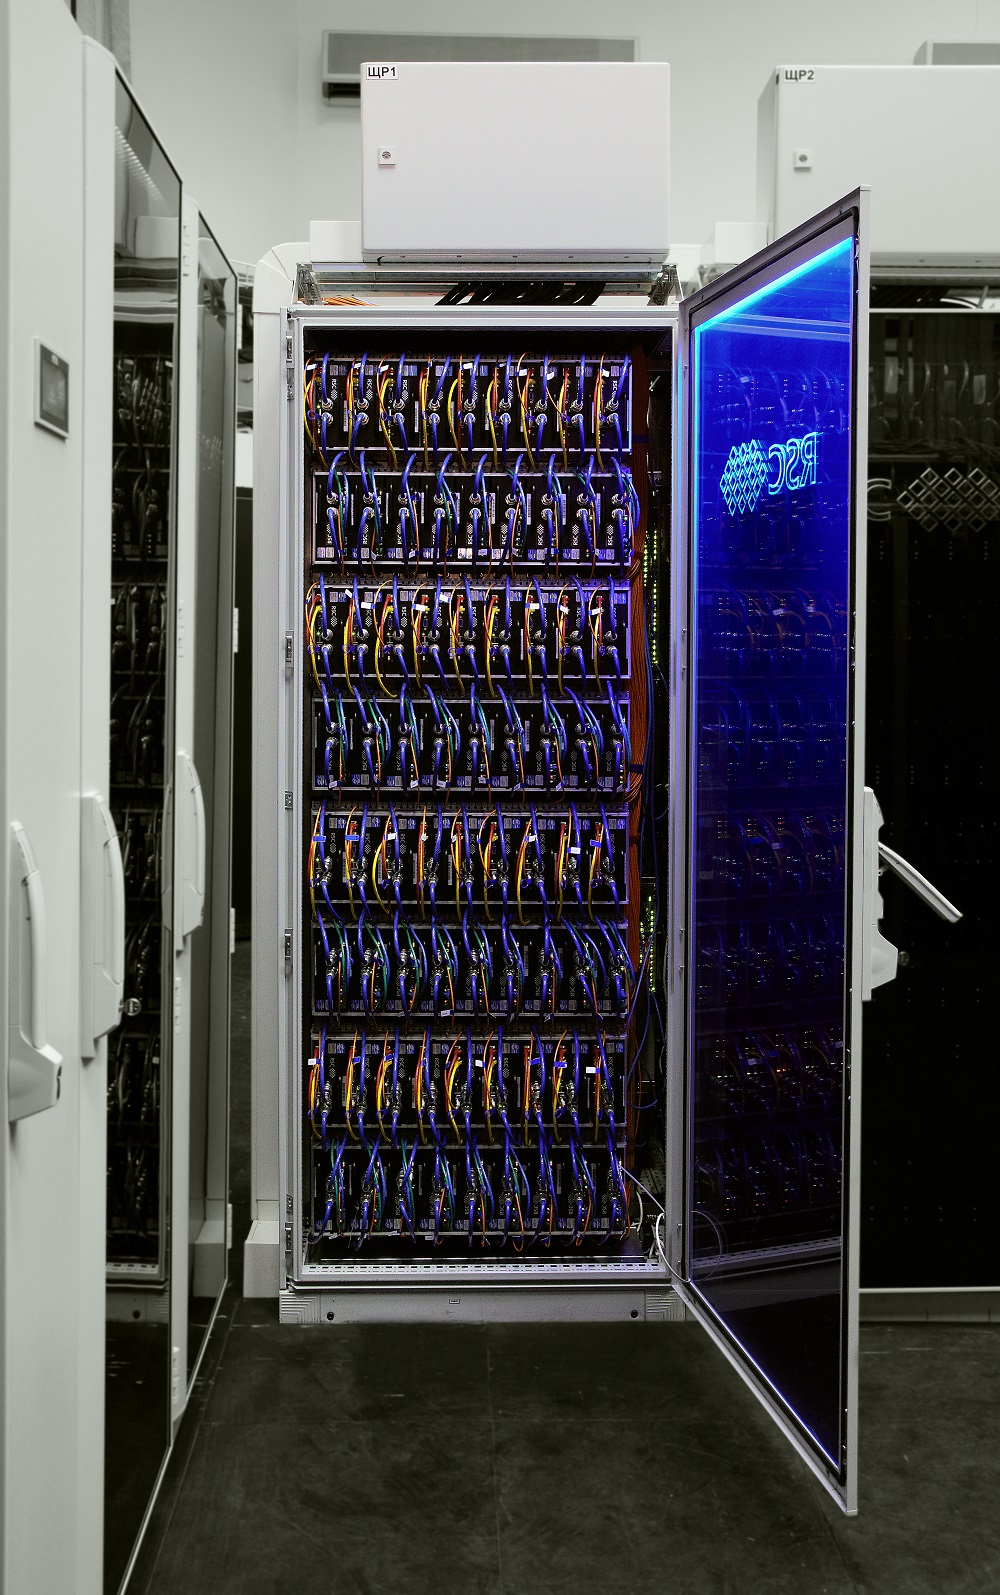 RSC Data Center (from 2 high dense cabinets up to hundreds of pflops)